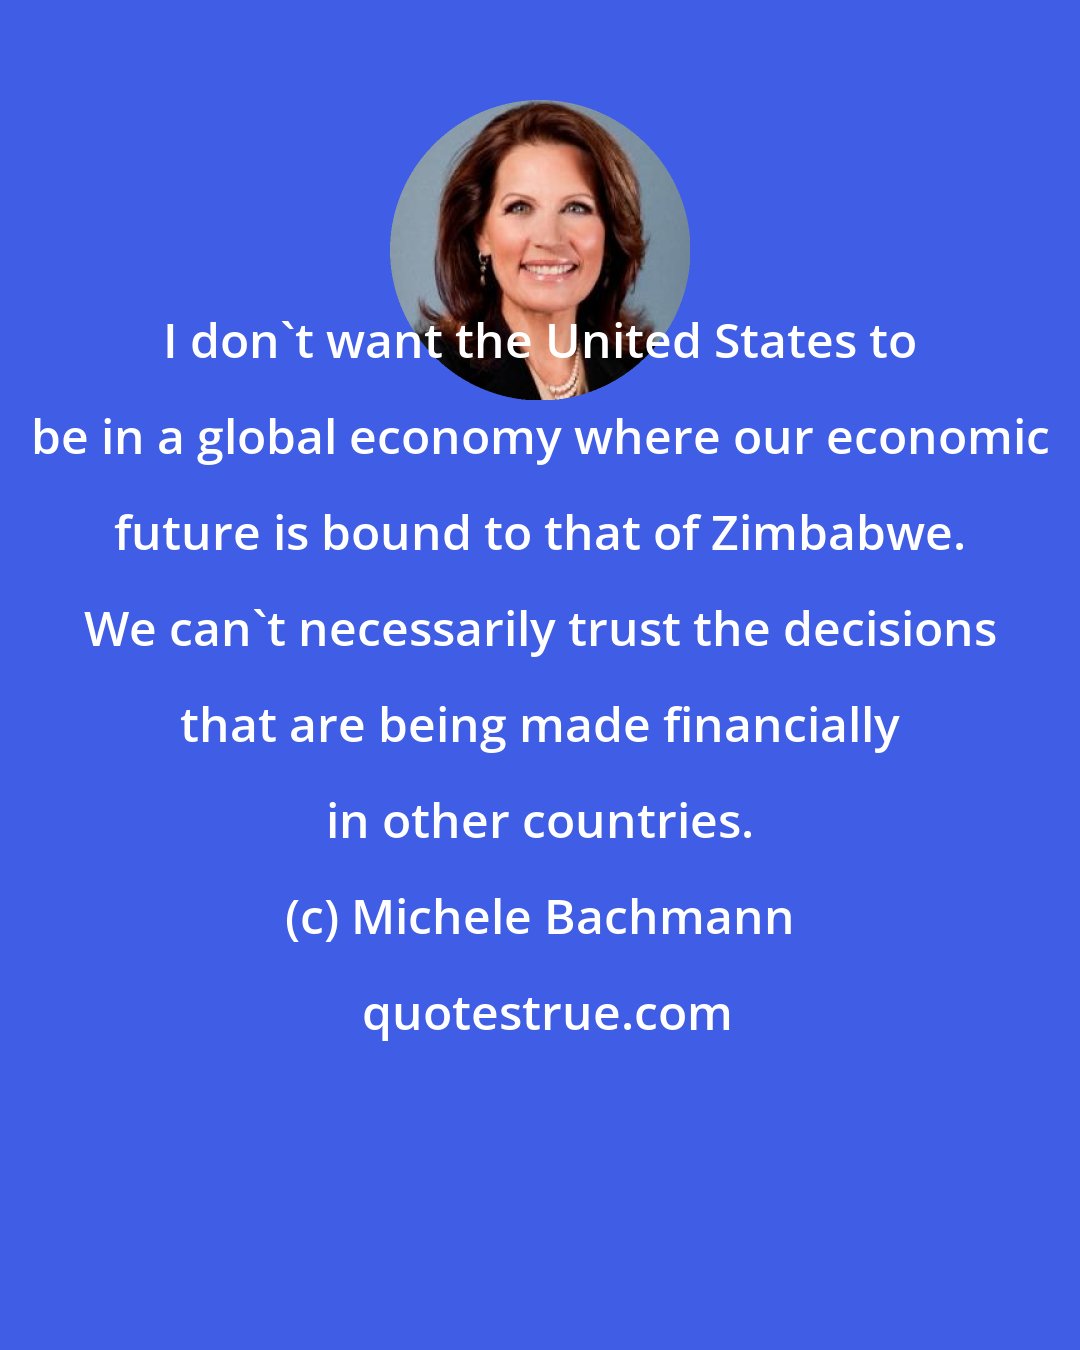 Michele Bachmann: I don't want the United States to be in a global economy where our economic future is bound to that of Zimbabwe. We can't necessarily trust the decisions that are being made financially in other countries.